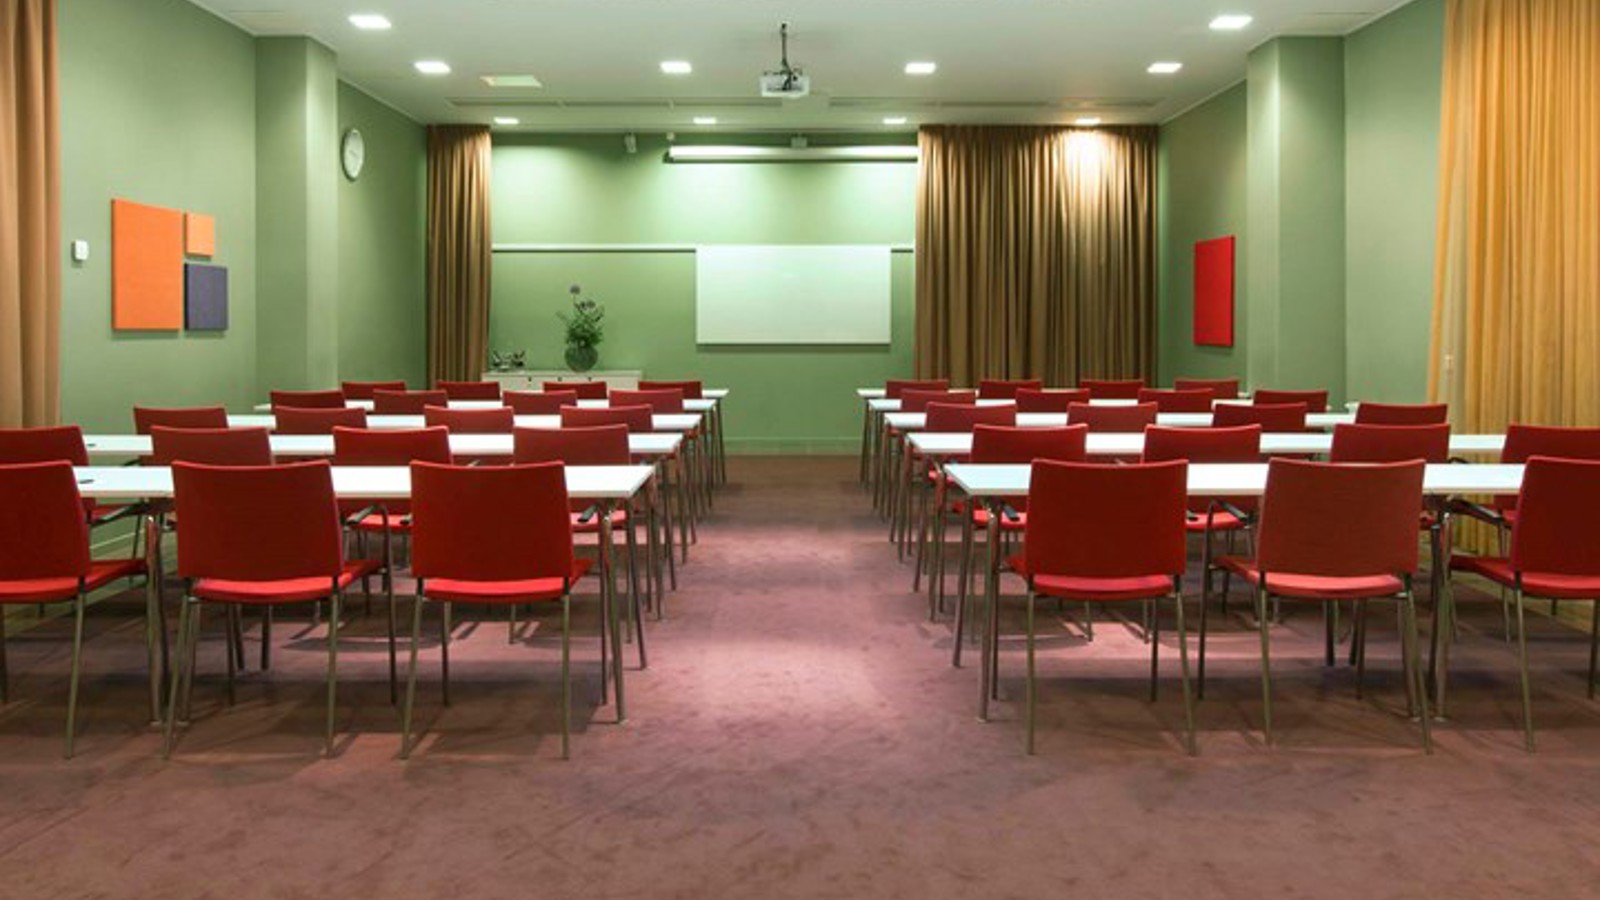 Conference room with lined up red chairs, green walls and yellow draperies